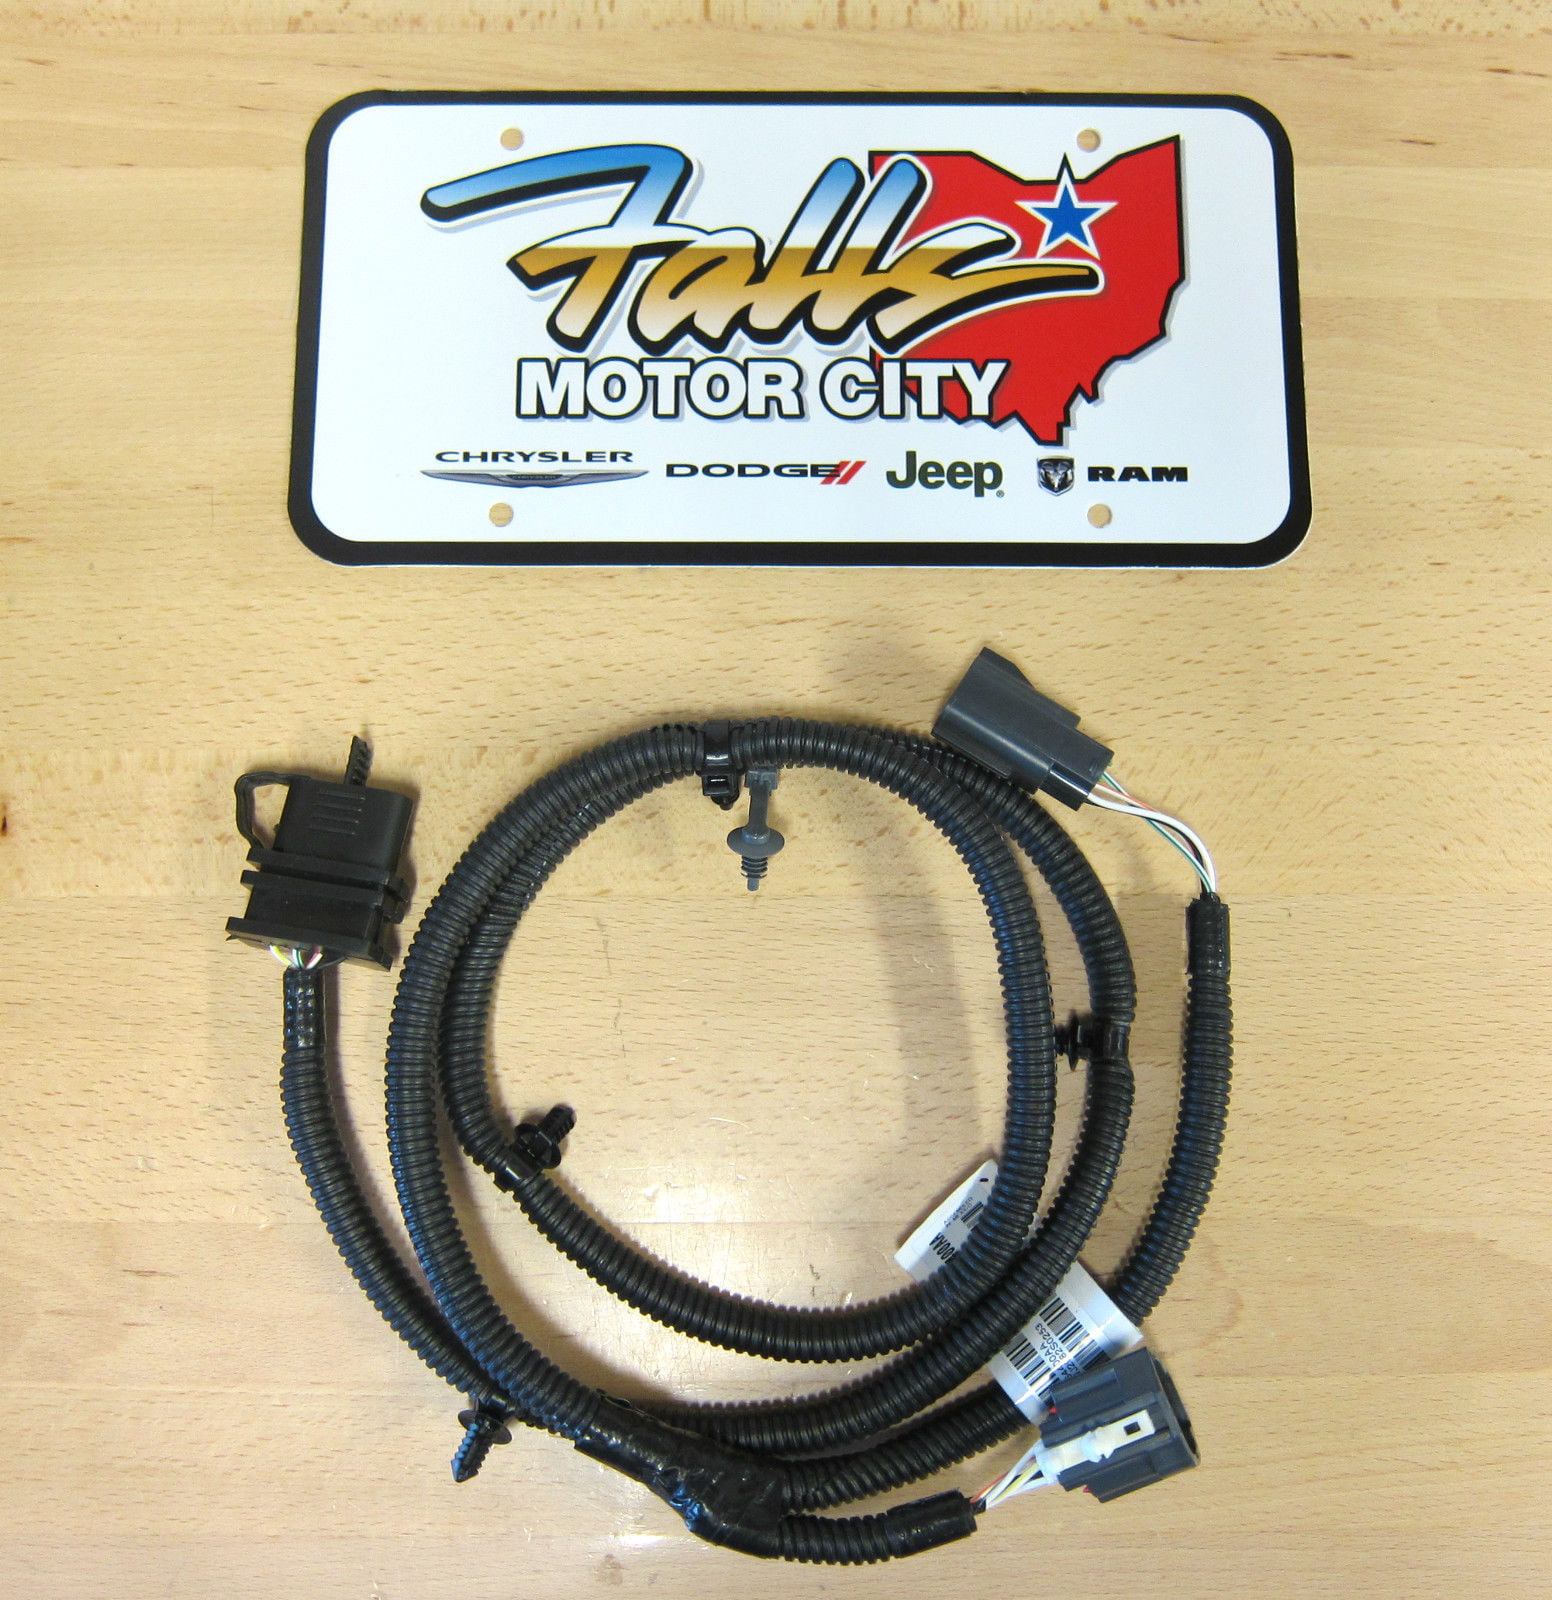 Jeep Wrangler Hitch Wiring Harness from i5.walmartimages.com